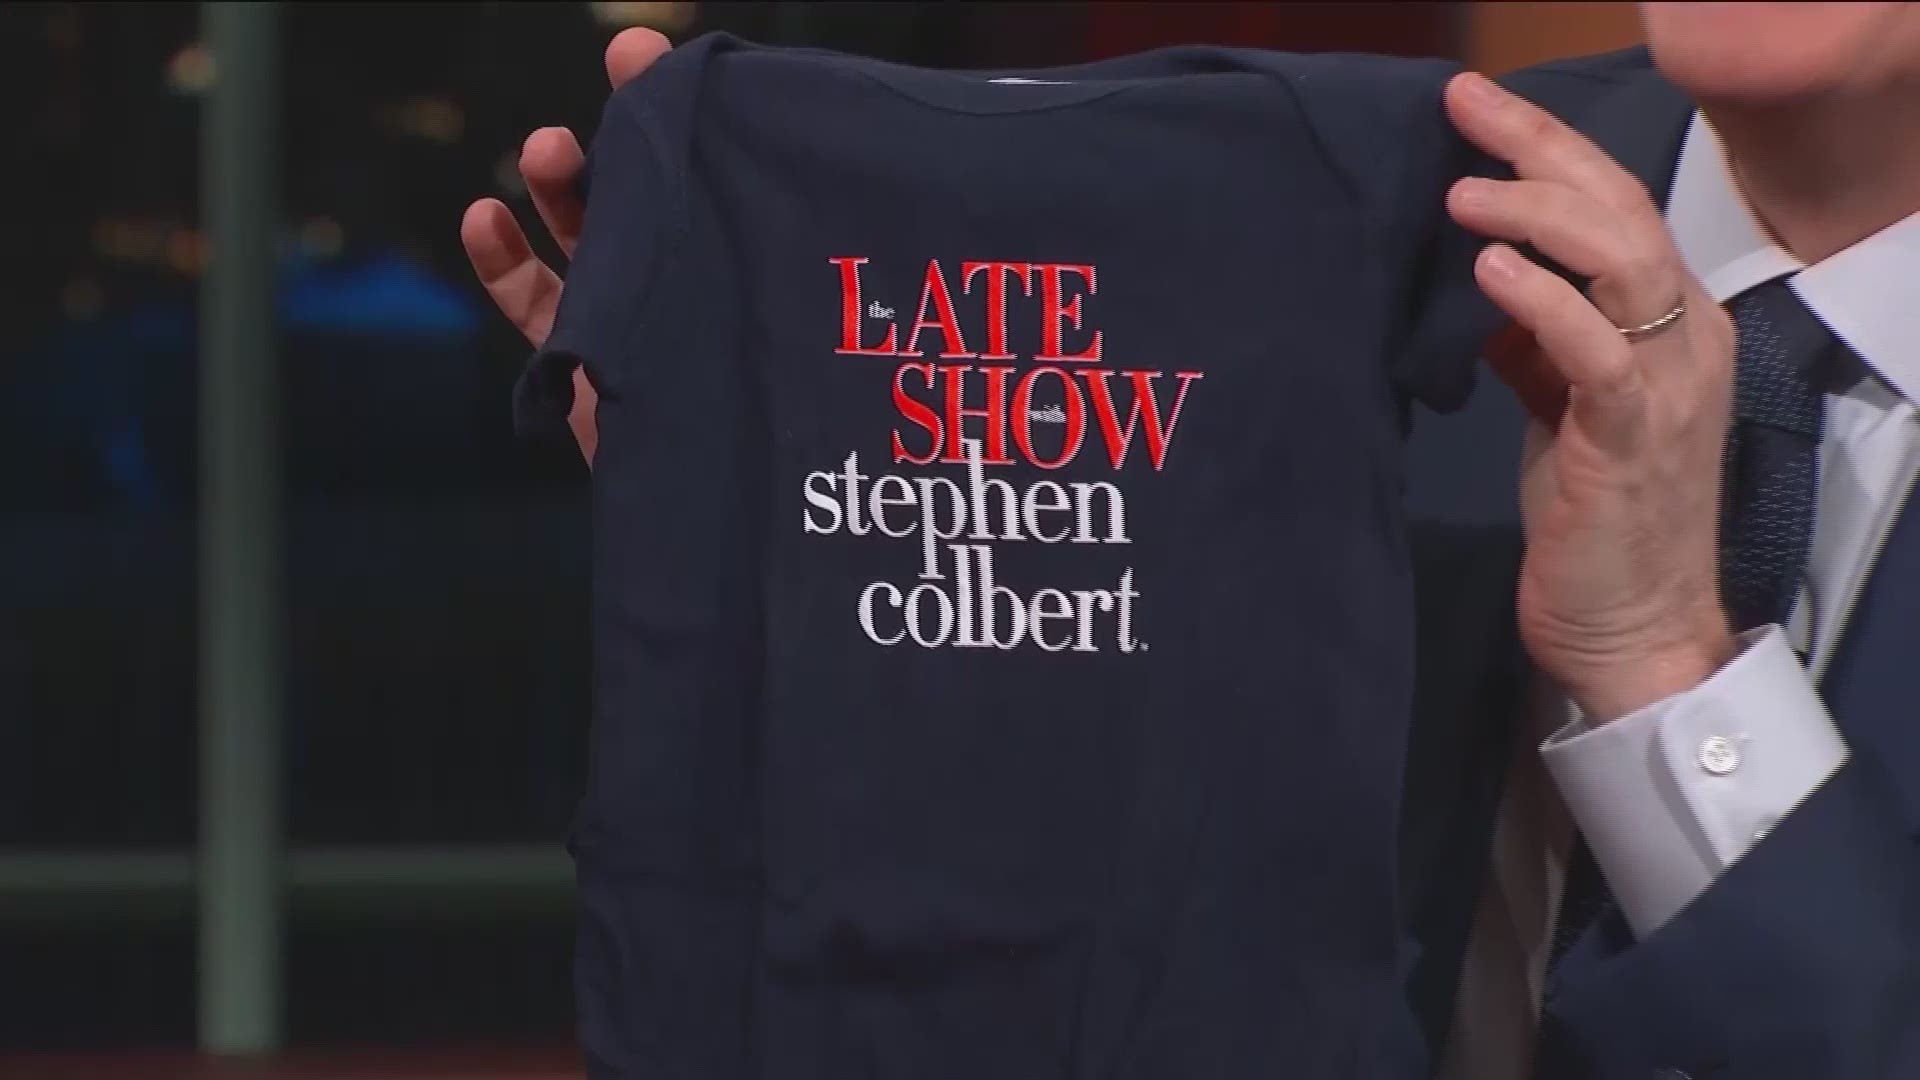 Margaret Brennan, moderator of "Face the Nation" revealed she is pregnant on "The Late Show with Stephen Colbert."